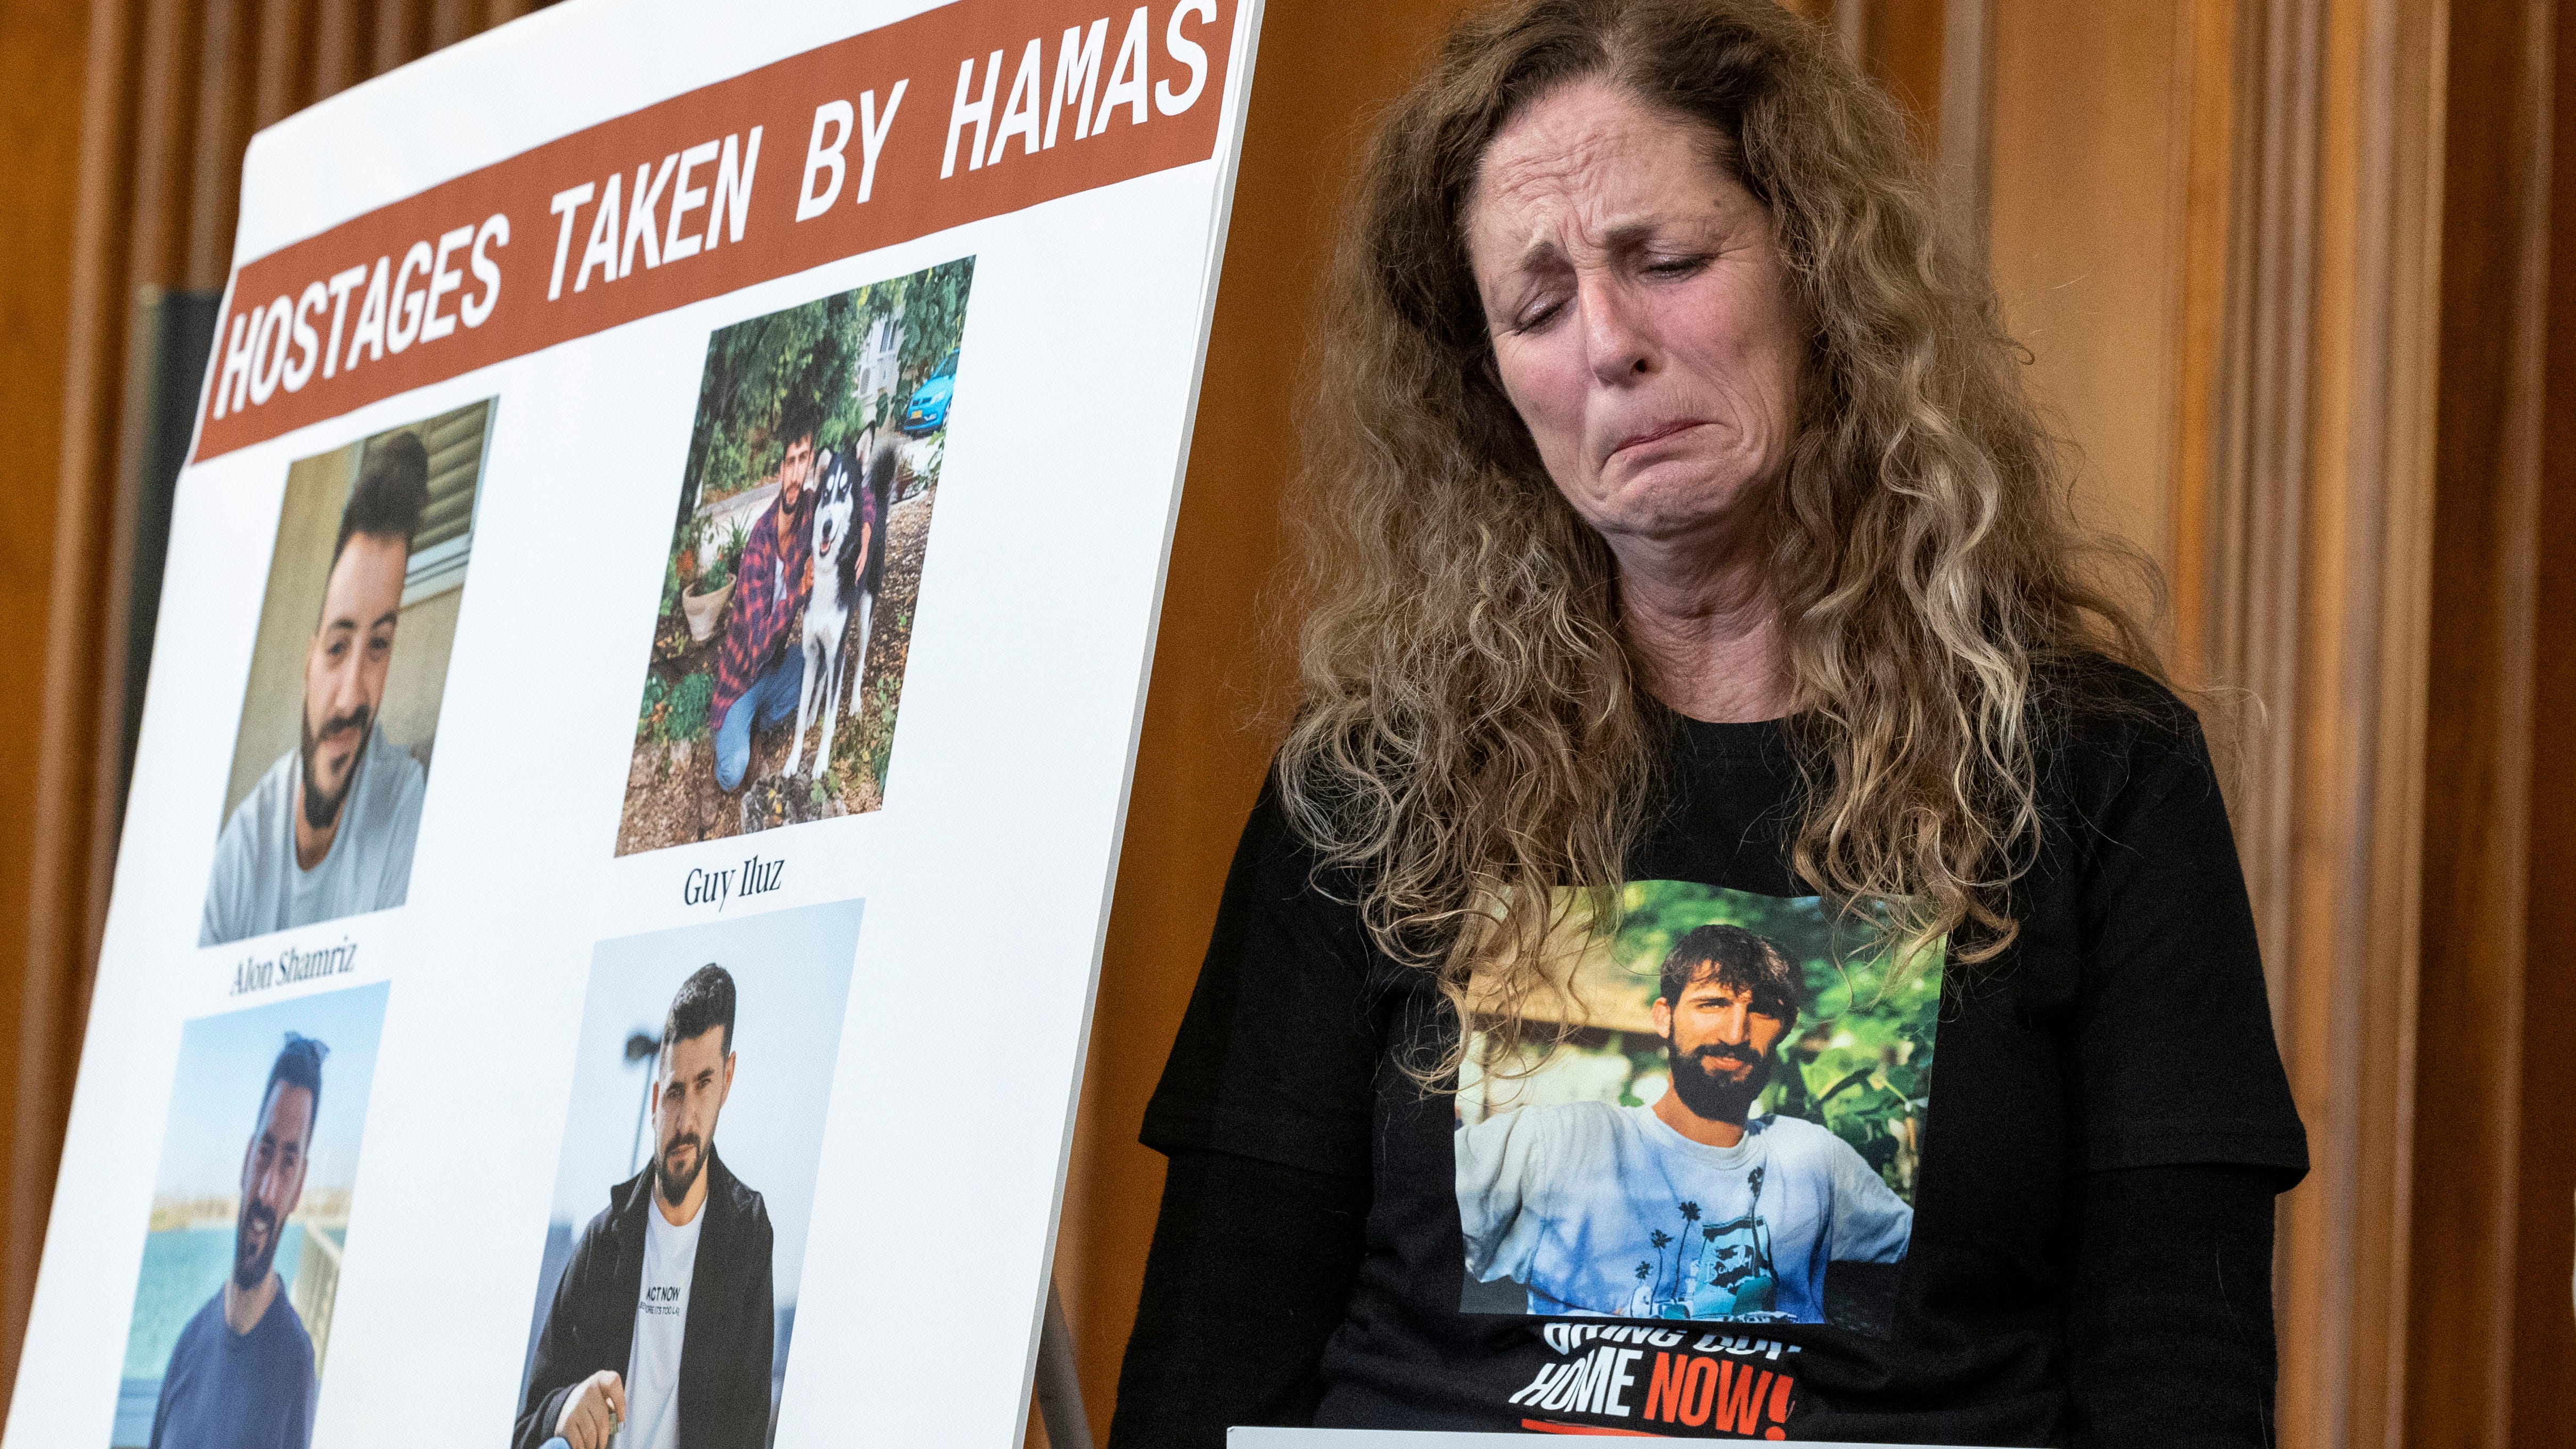 Families of Hamas hostages describe broken hearts, child’s 9th birthday in captivity of terrorists in Gaza